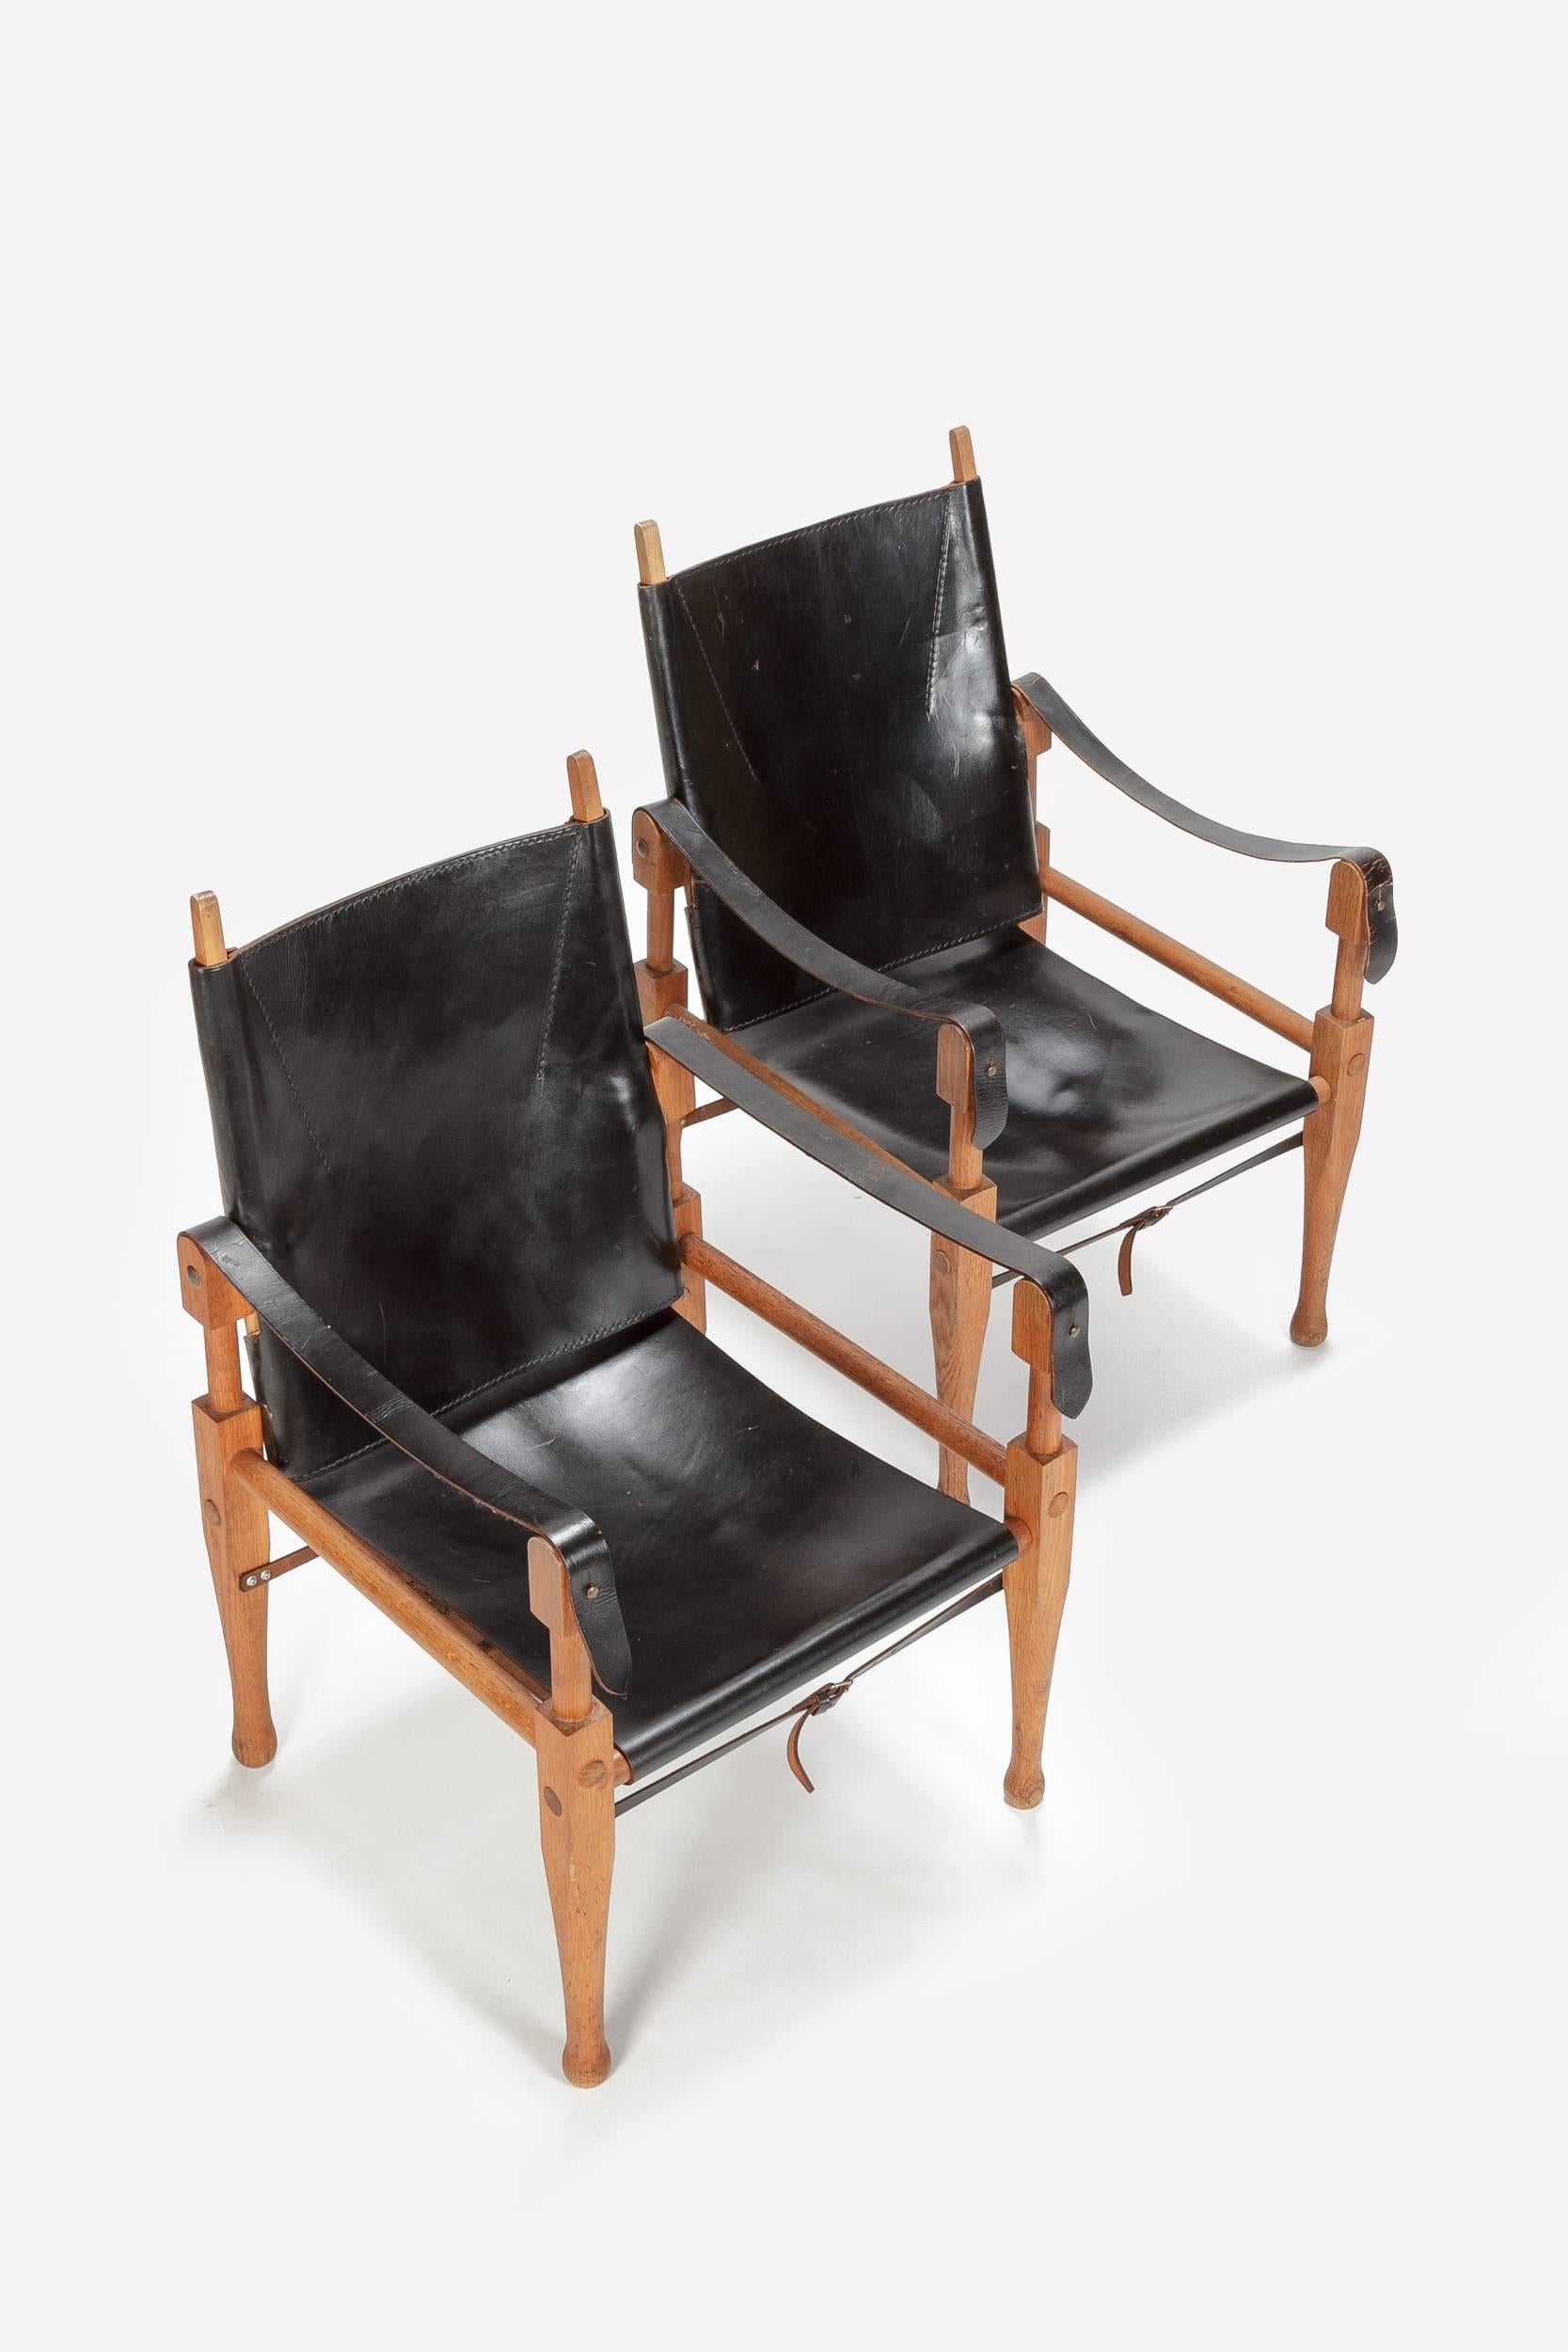 Pair of Wilhelm Kienzle safari chairs designed in 1928 produced in the 1950s by Wohnbedarf Zurich in Switzerland. Frame is made of solid oak, original black leather with a very nice patina, brass screws! Completely dismountable.